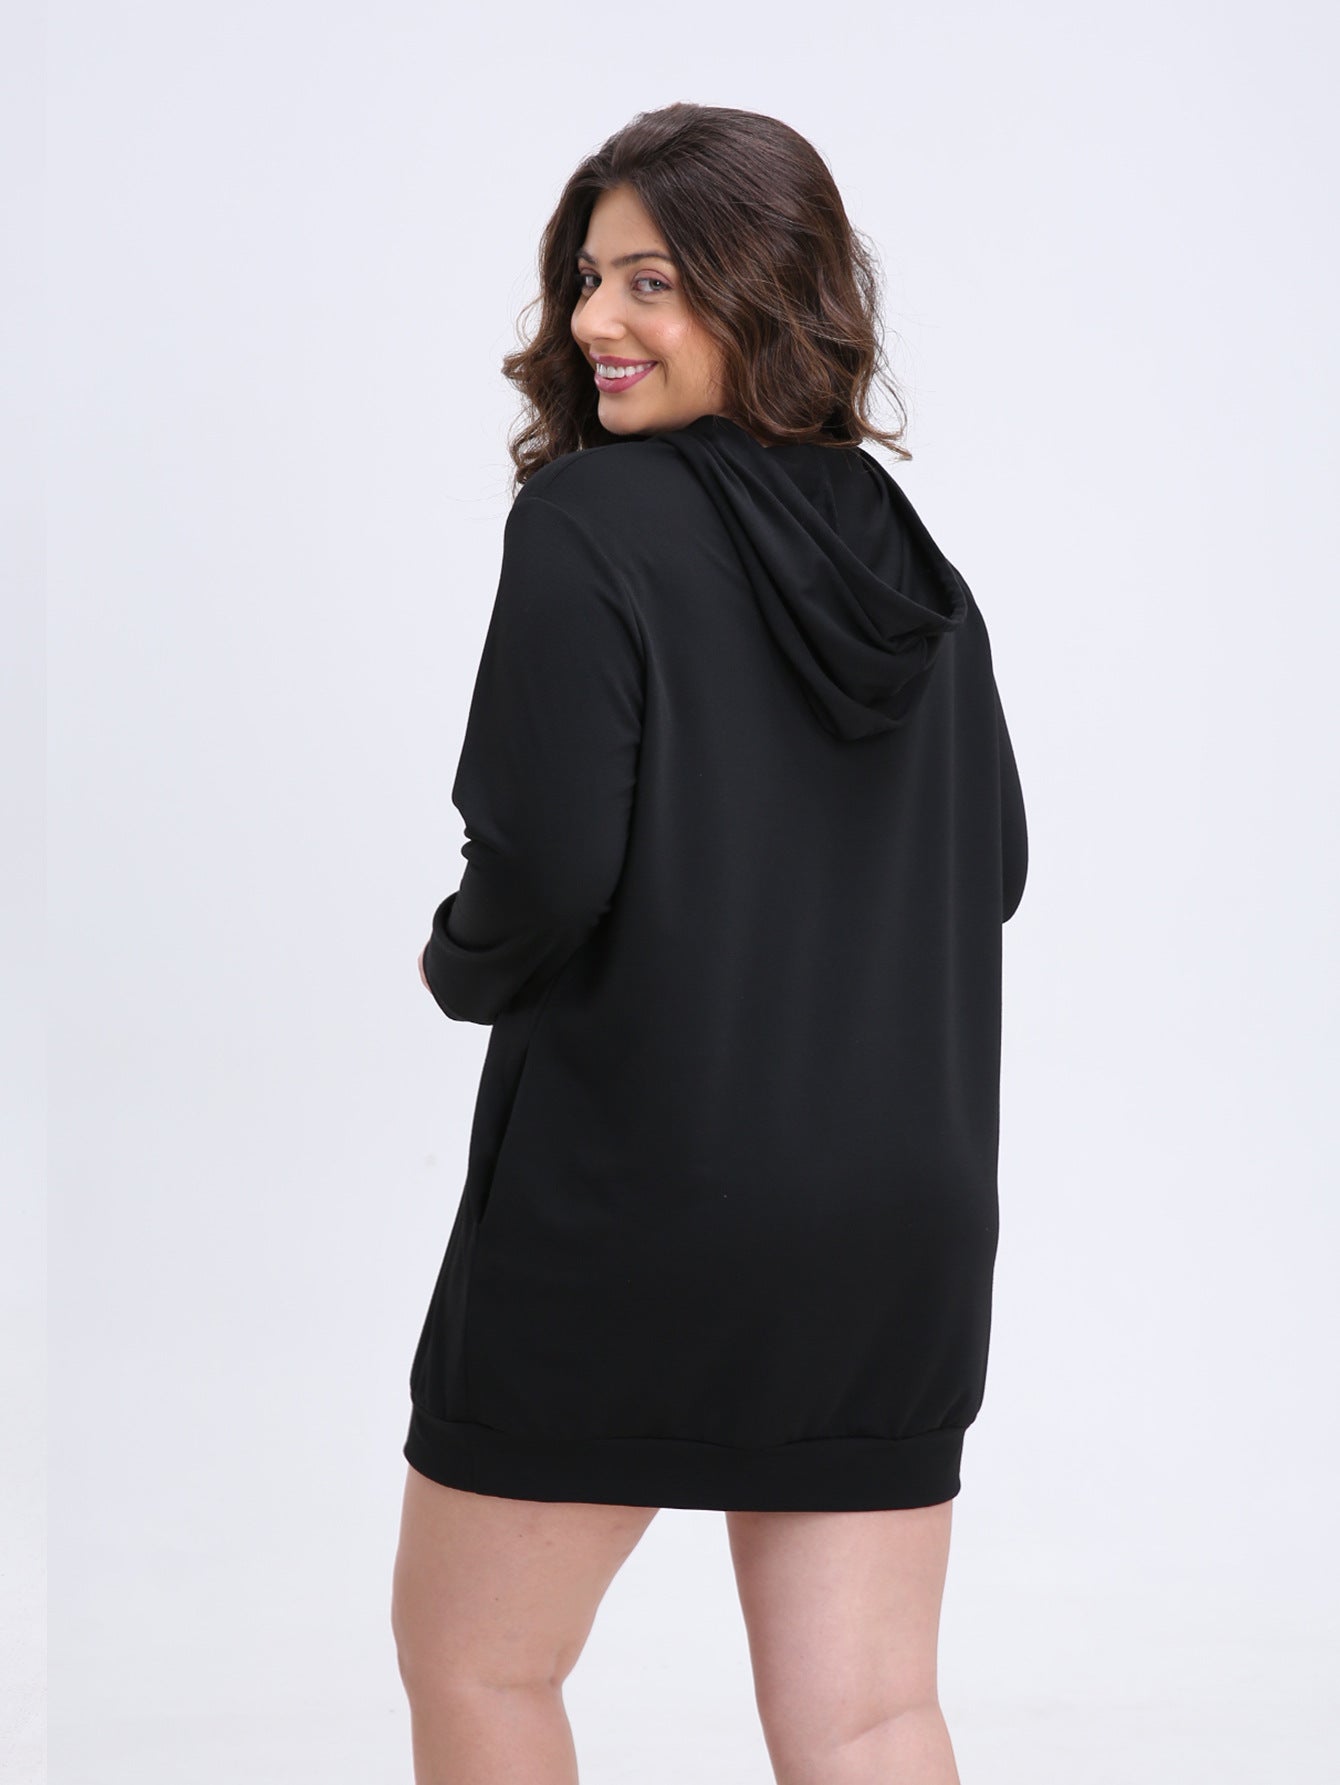 BamBam Plus Size Women's Solid Color Long Casual Hoodies - BamBam